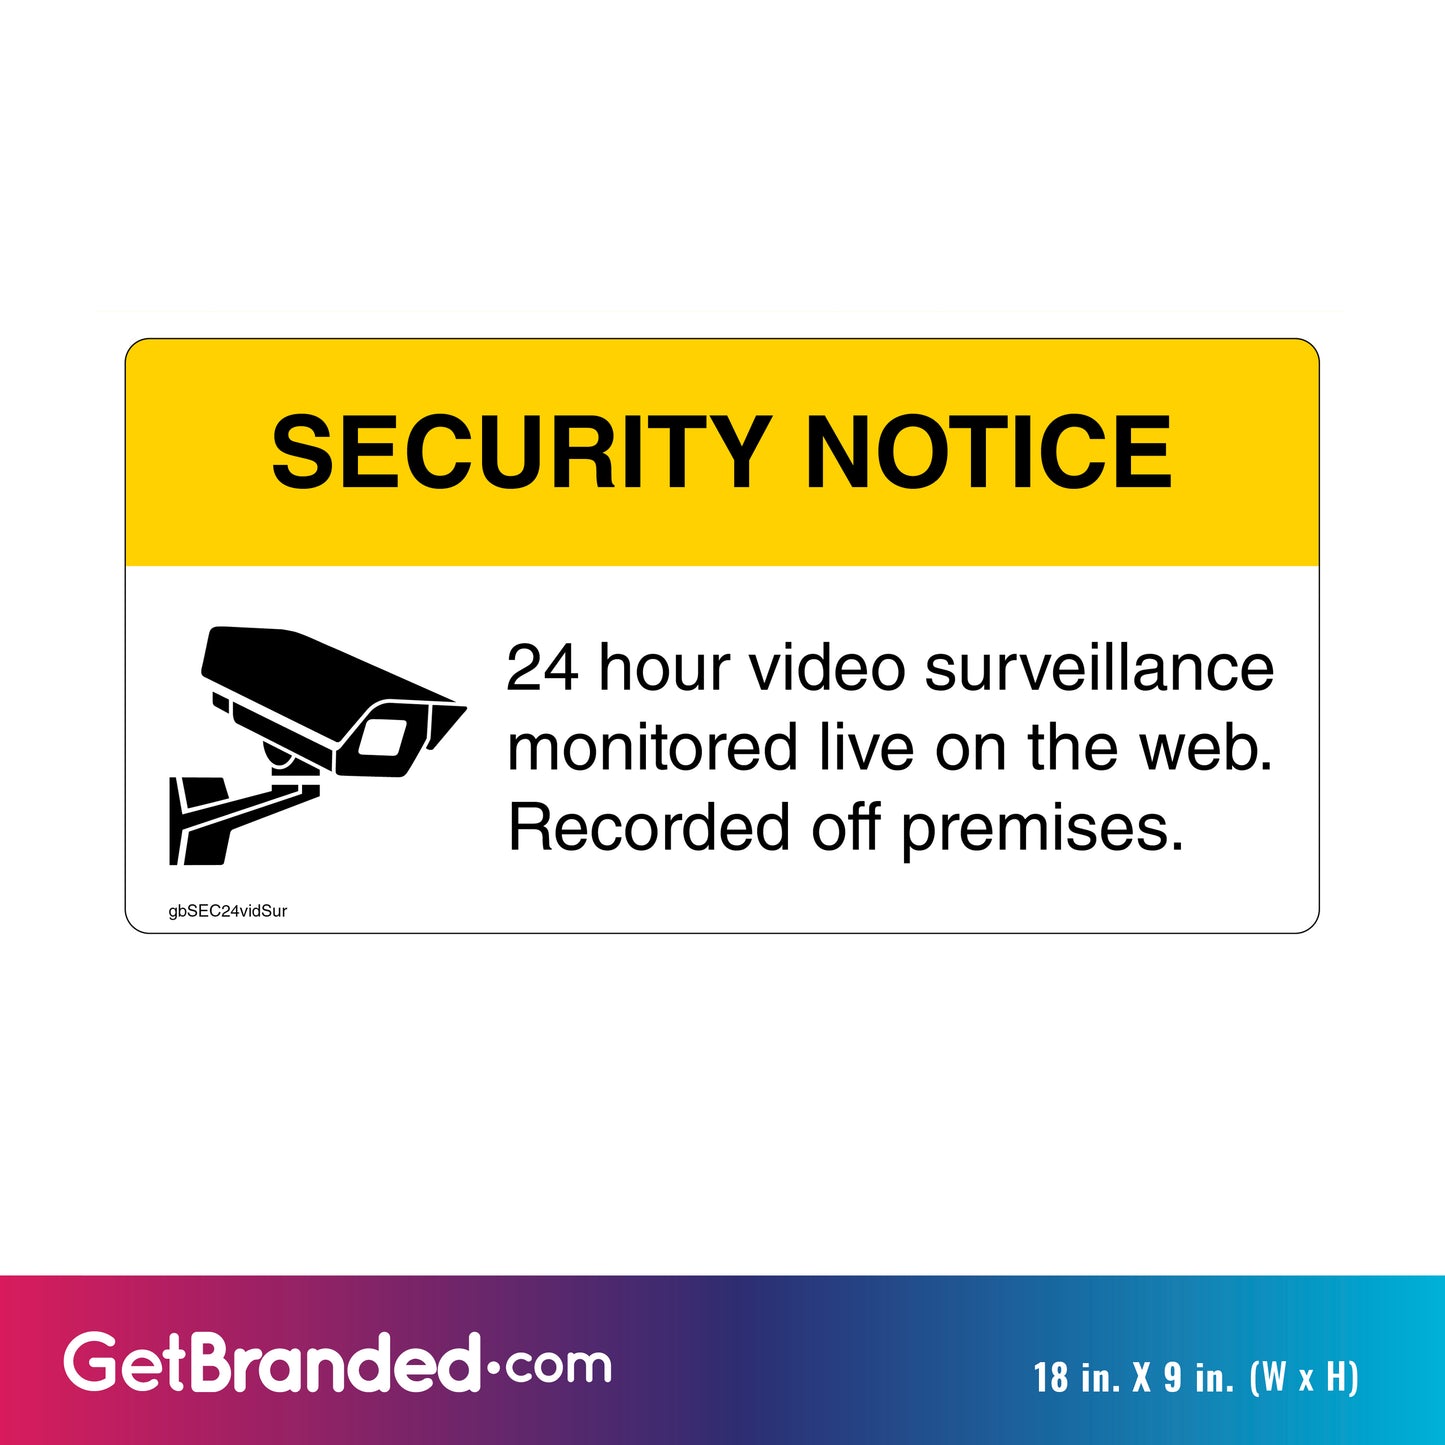 Security Notice 24hr Surveillance Decal. 18 inches by 9 inches in size.